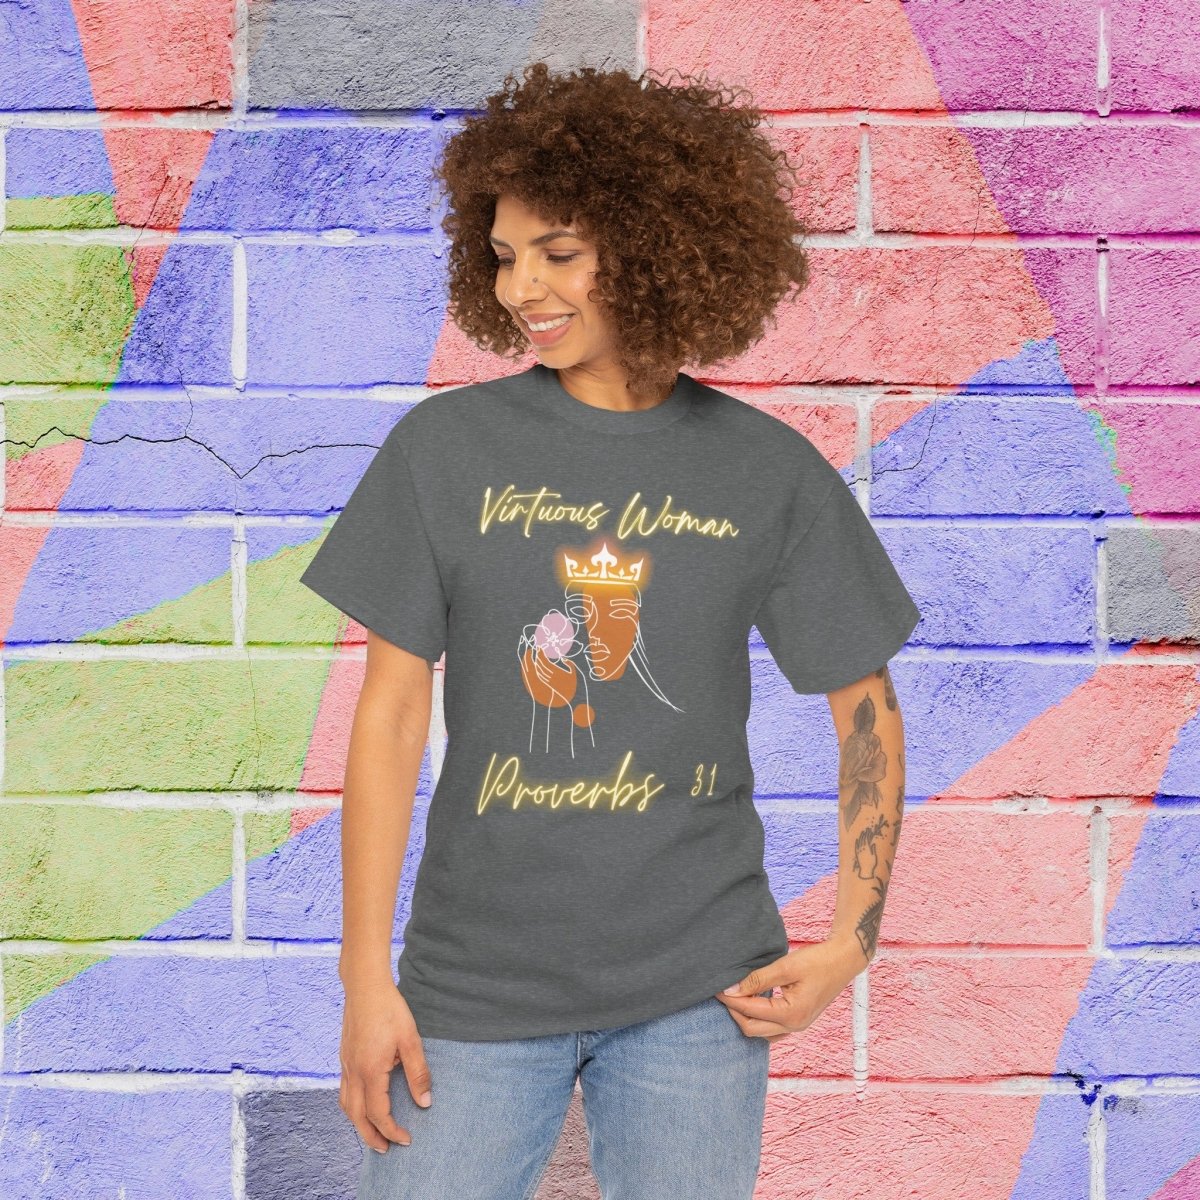 "A Virtuous Woman of Color": Proverbs 31 Women's Heavy Cotton Tee - Plain Vision Brand